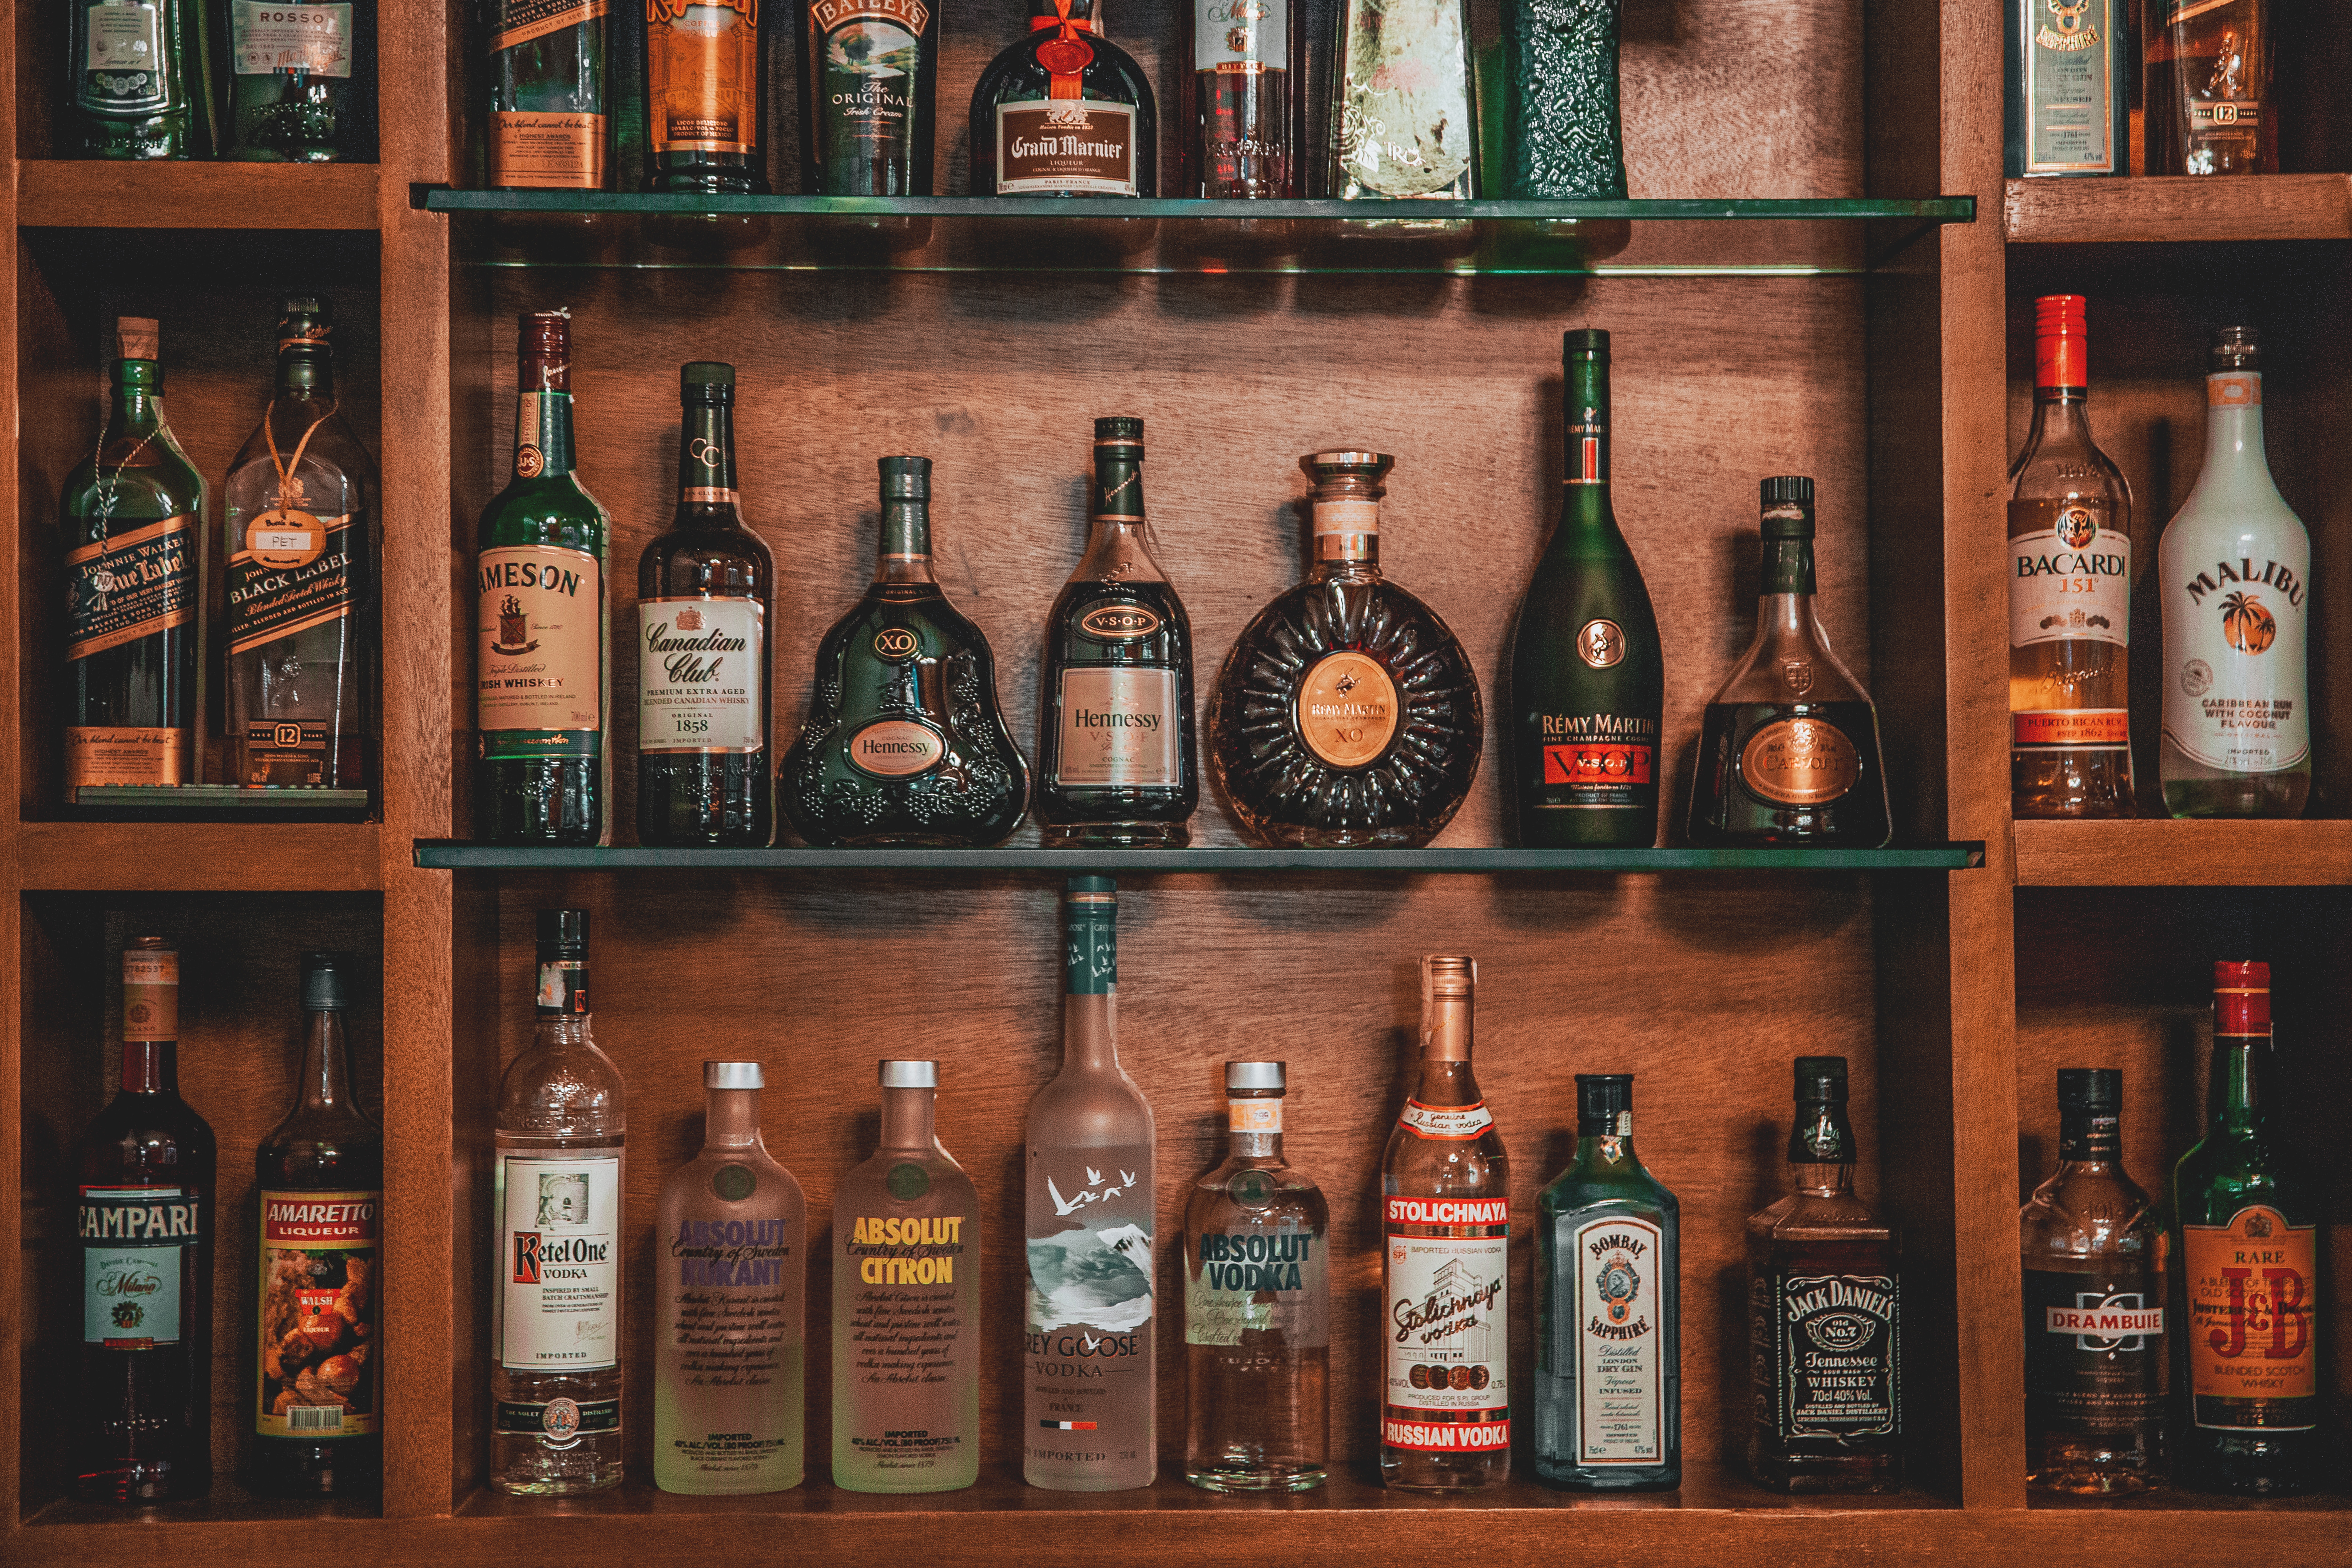 Finding the Perfect Bottle at Liquor Stores in Singapore